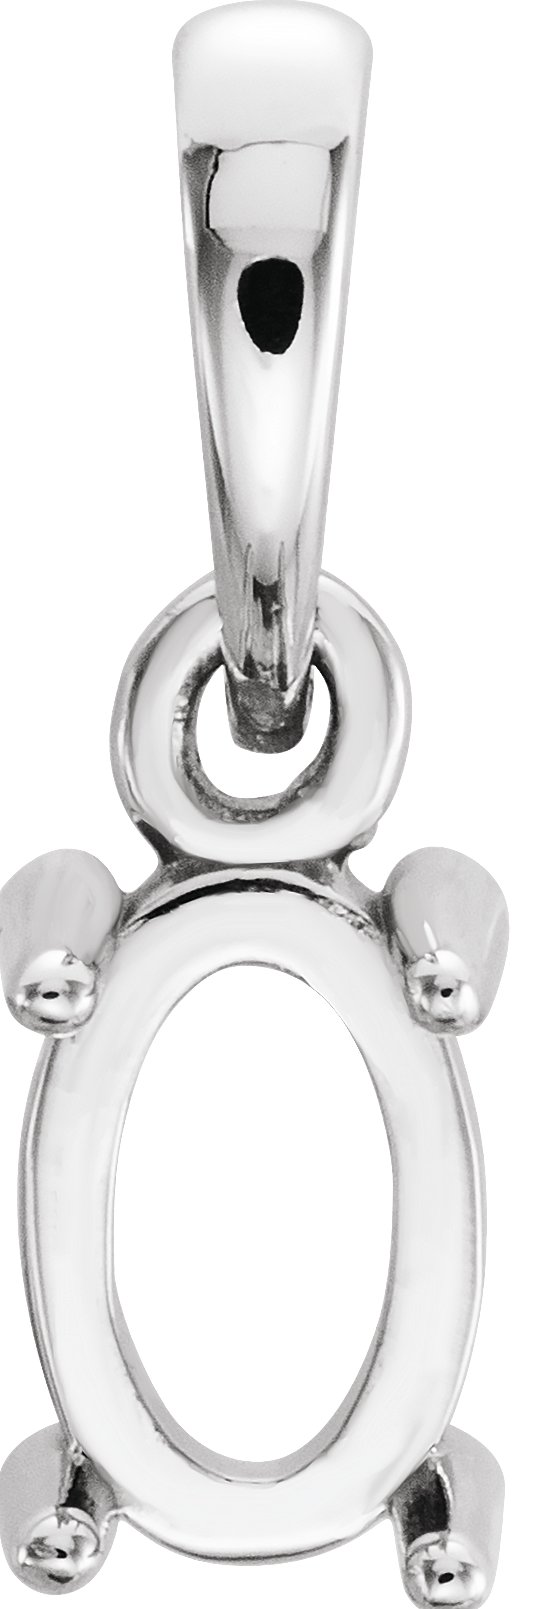 652167 / 14Kt White / 6 Mm / Polished / Oval Pendant Mounting